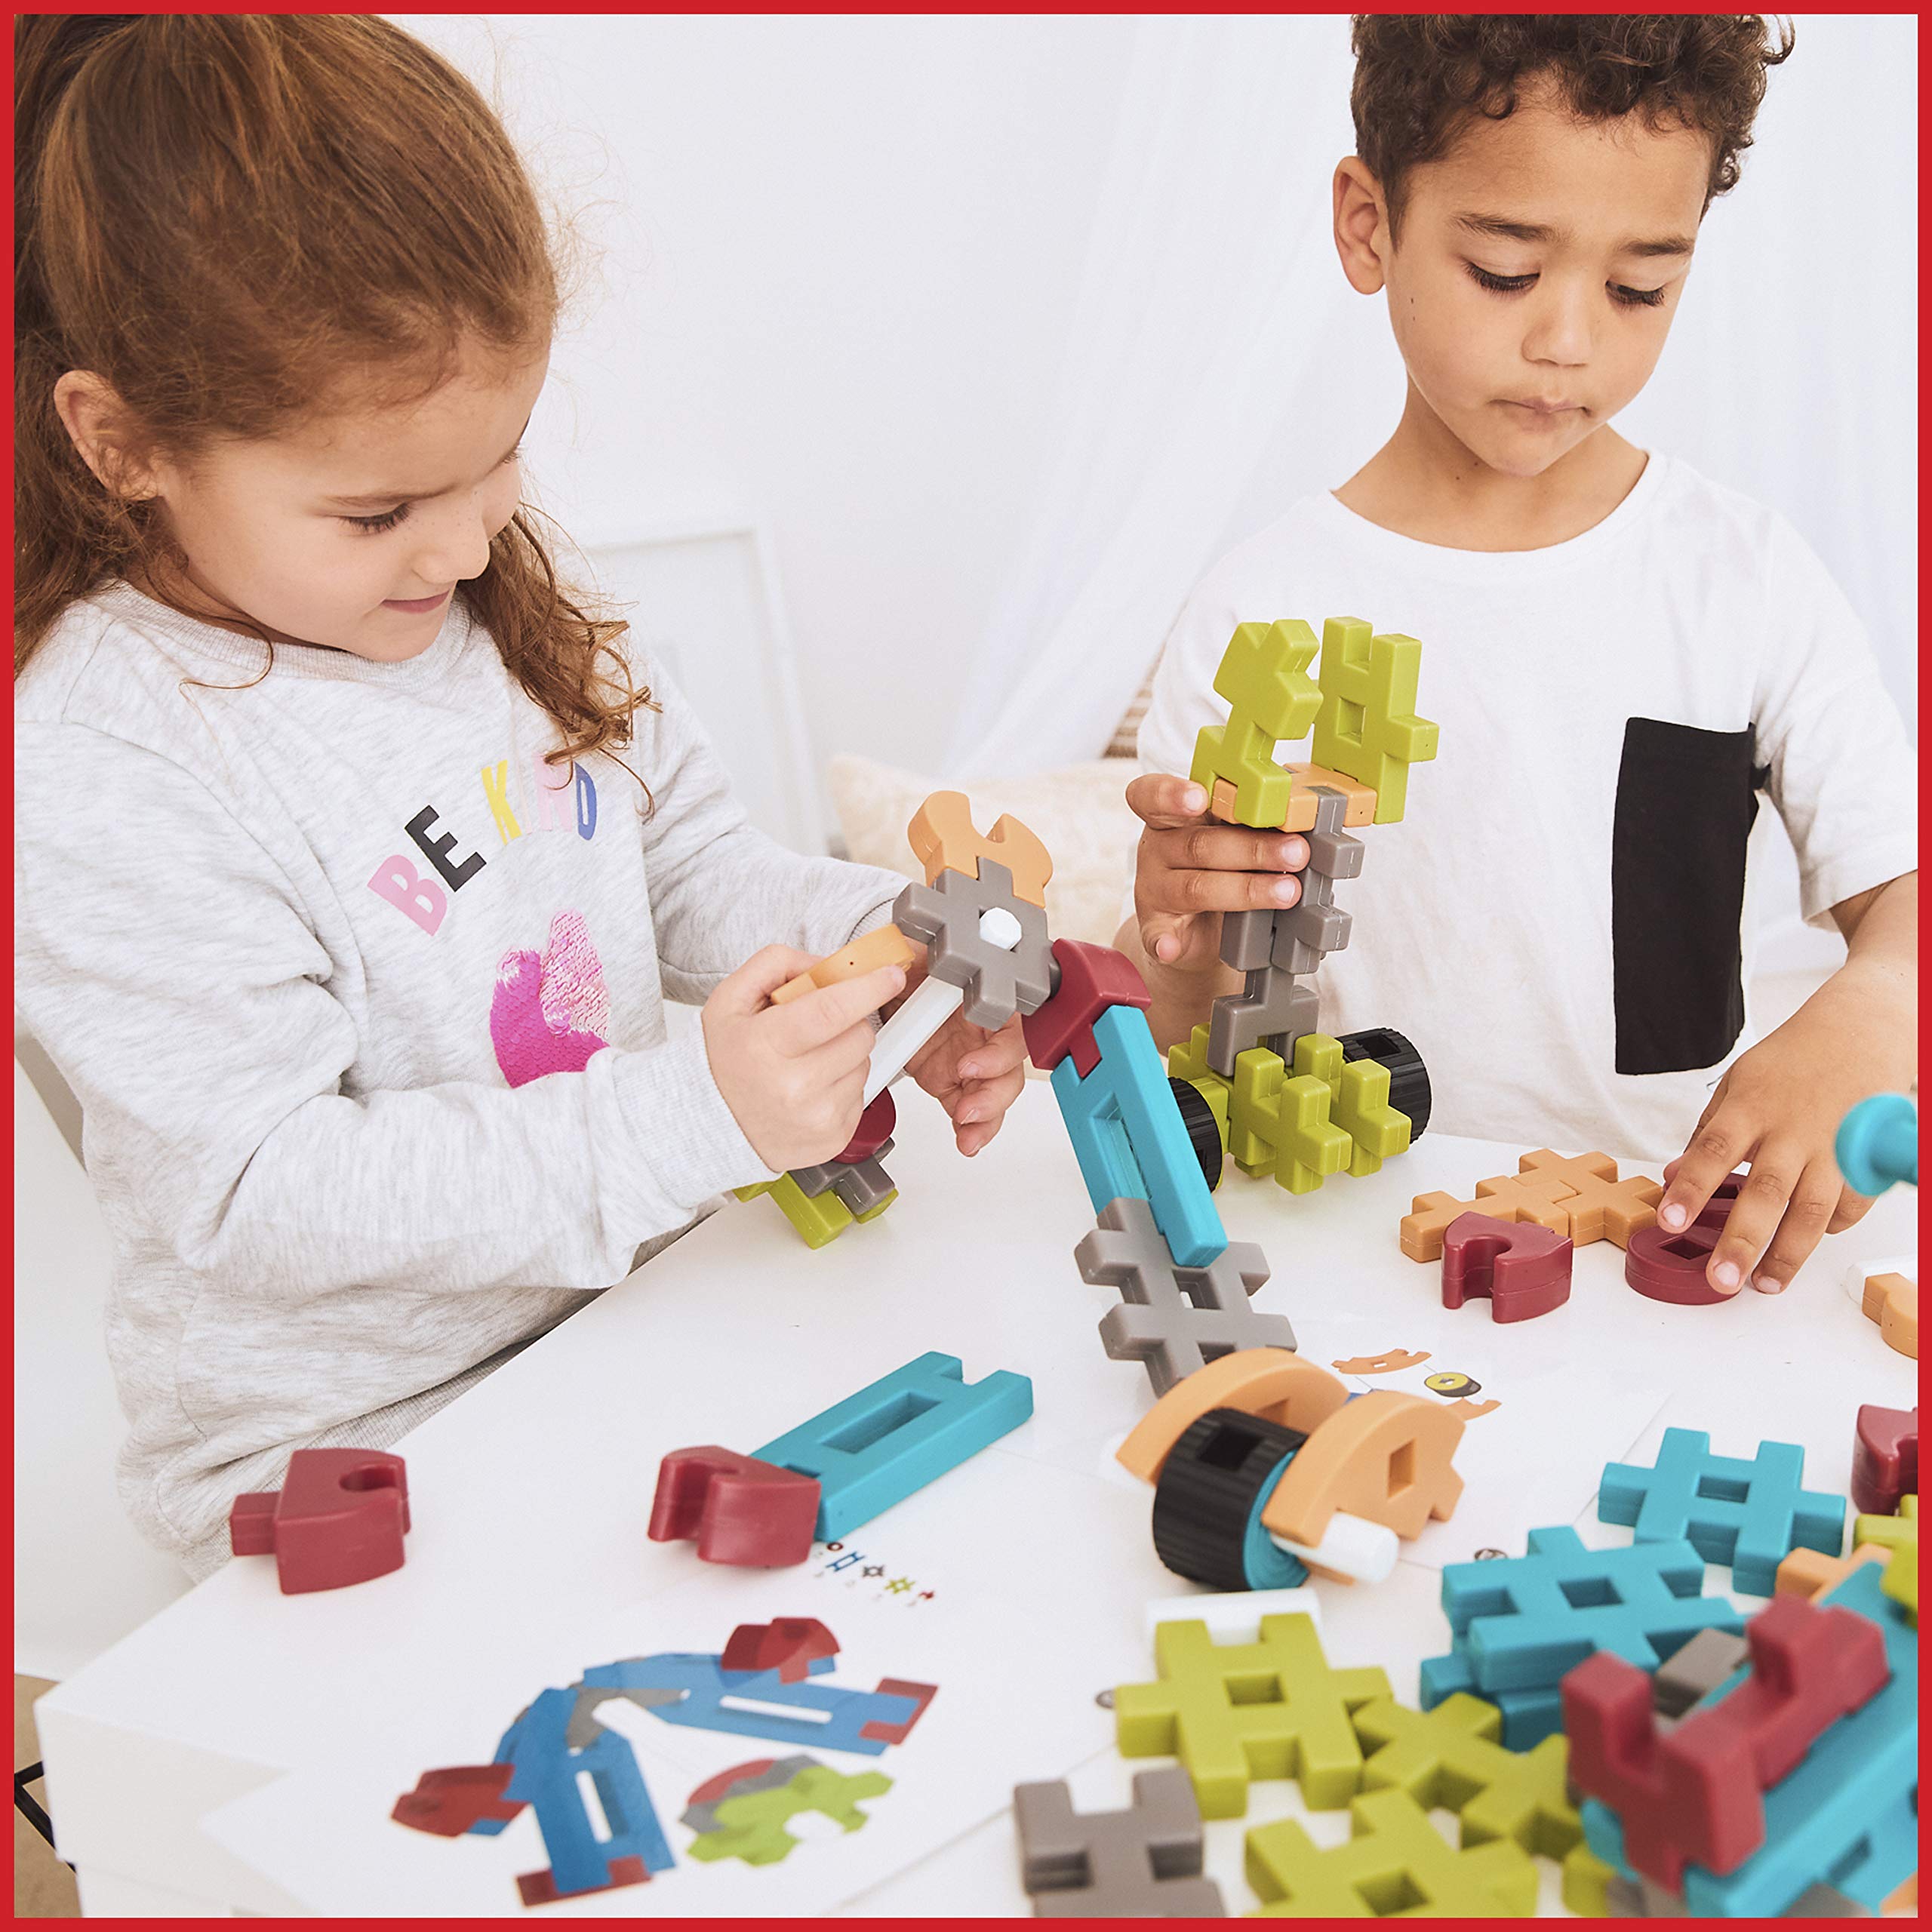 edxeducation Fun Blocks Activity Set - Building Toys for Kids - 83 Pieces - 19 Shapes - Kids Building Toy - 16 Activity Cards